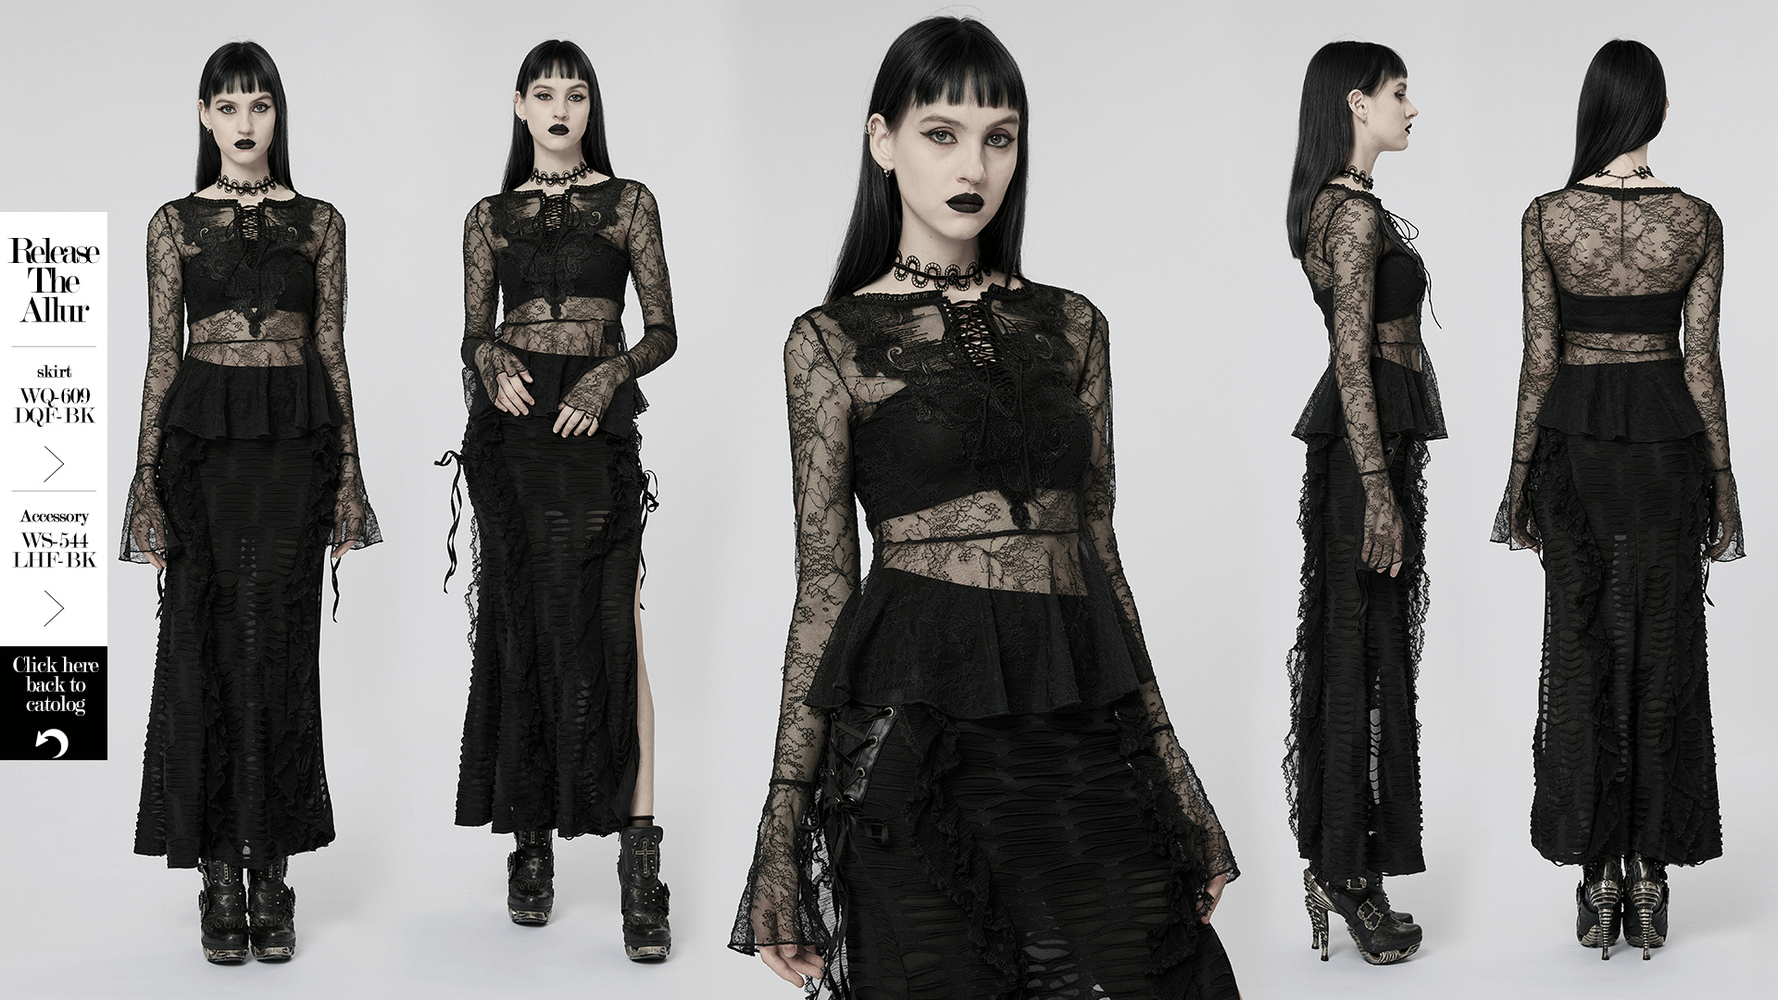 Elegant Gothic Bell-Sleeves Lace Transparent Top for Women - HARD'N'HEAVY